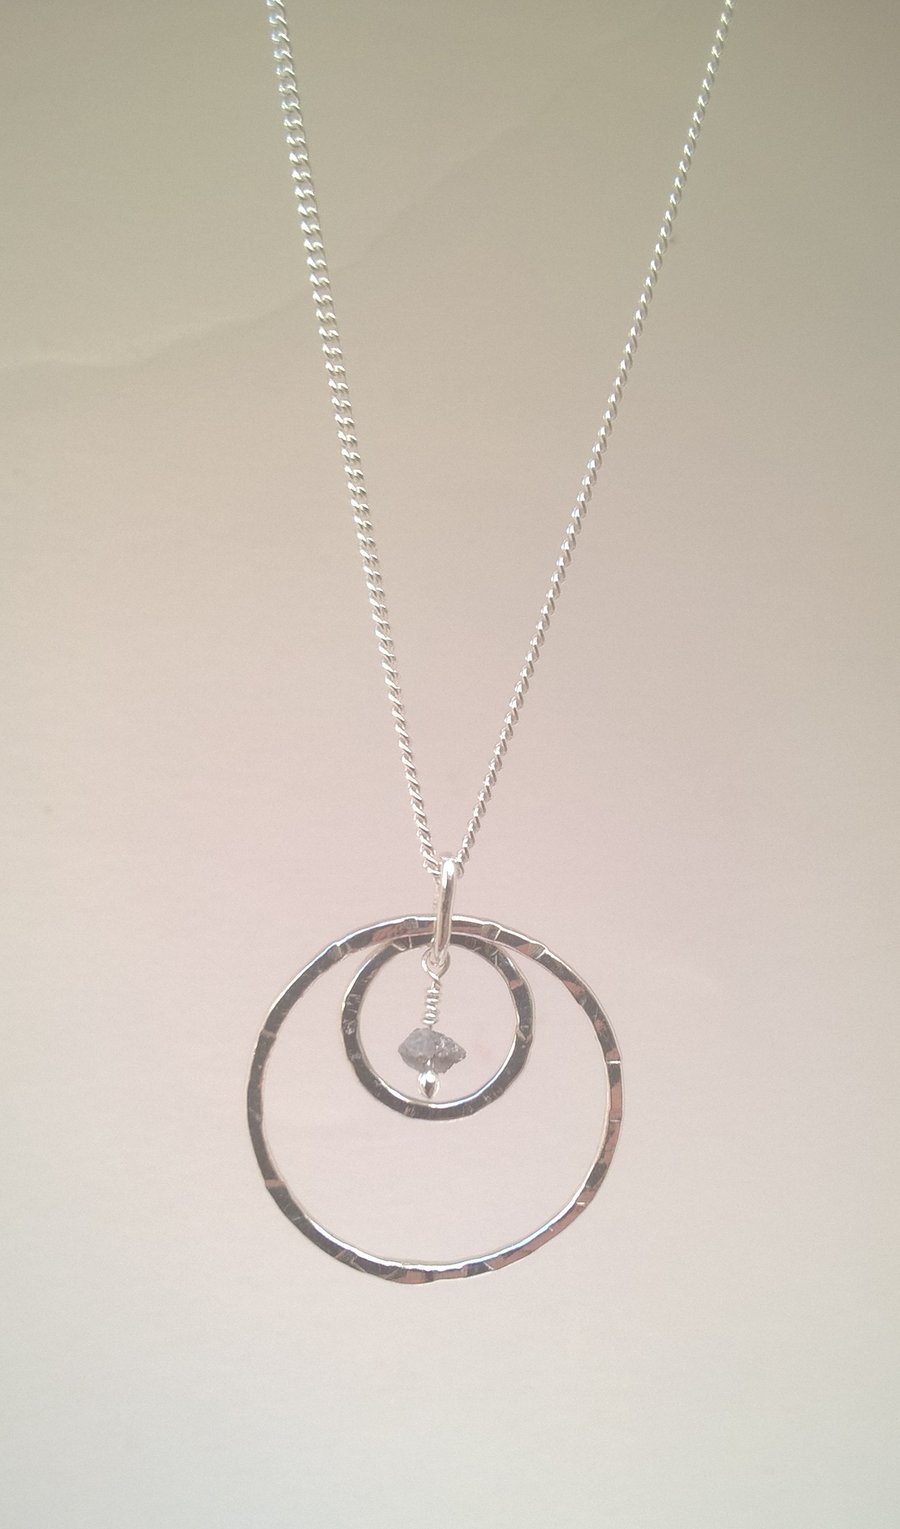 Raw Diamond and Silver necklace